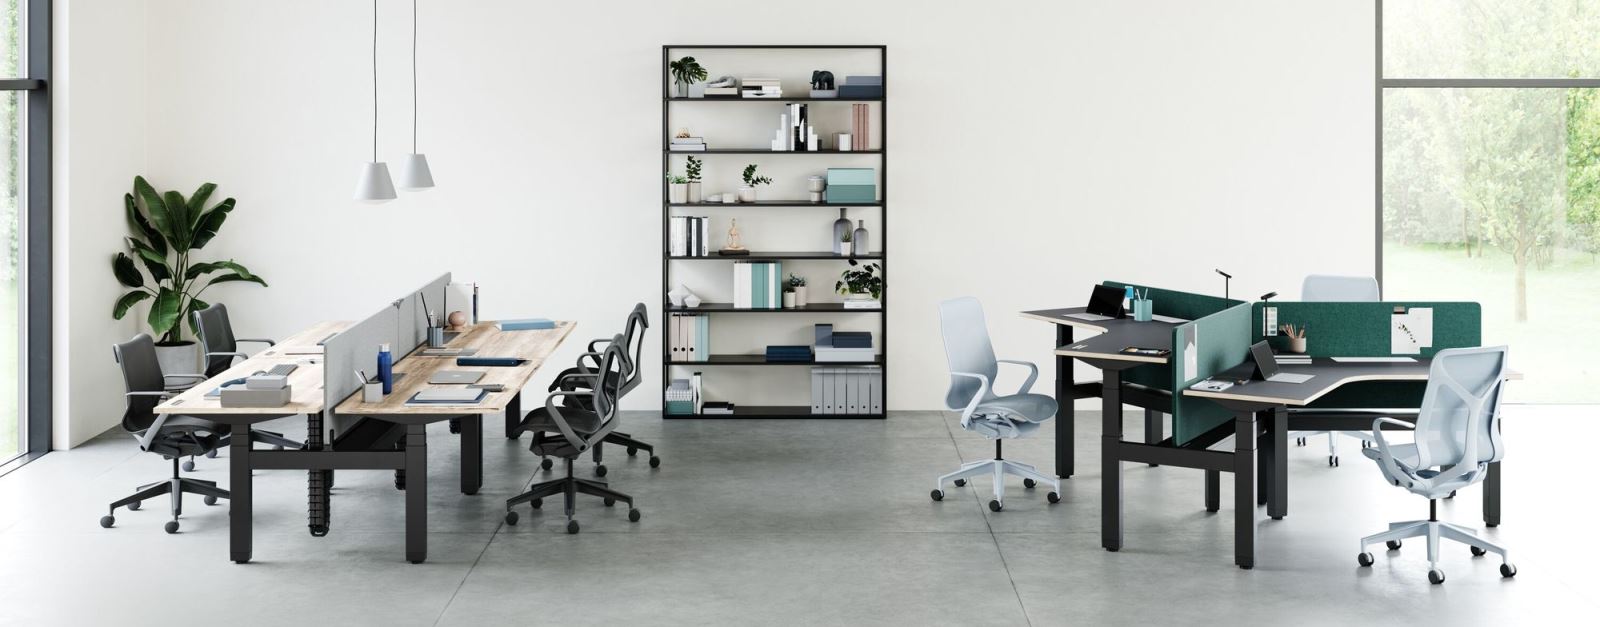 Ratio Workstation by Herman Miller available exclusively in Canberra at designcraft